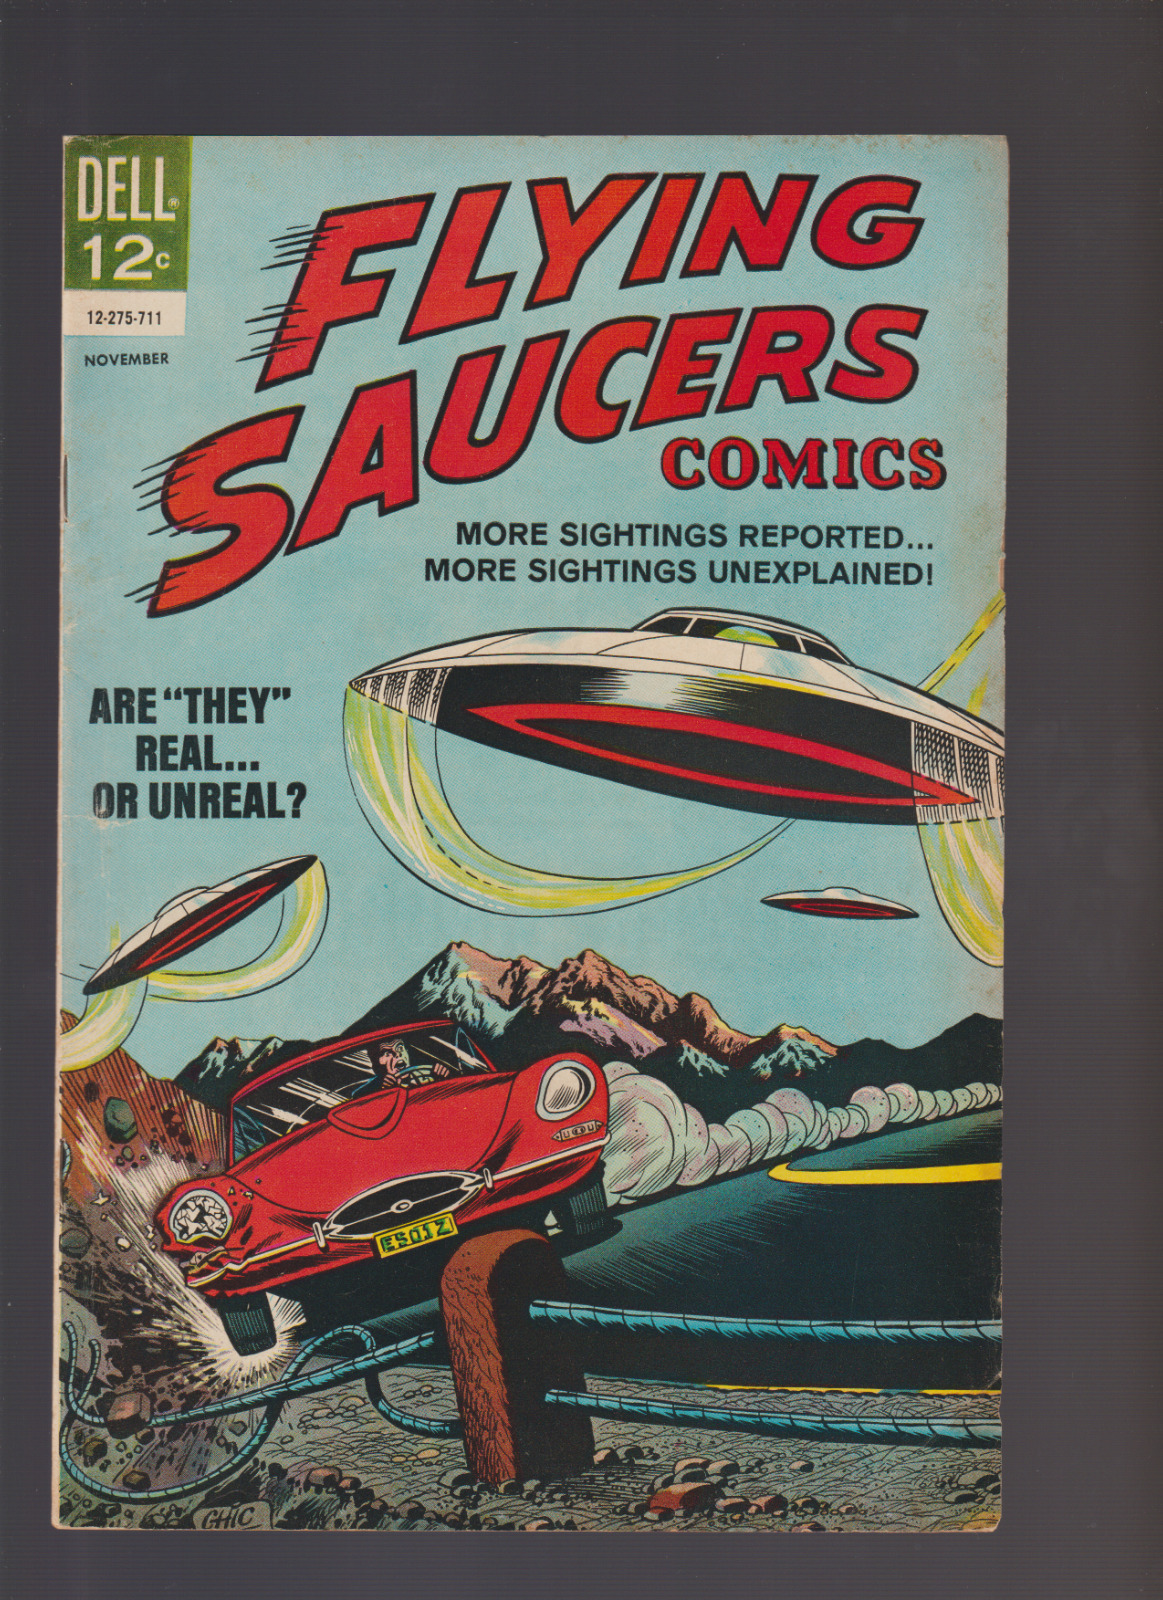 FLYING SAUCERS #4 (1967) Dell Comics CLASSIC  COVER CHIC STONE